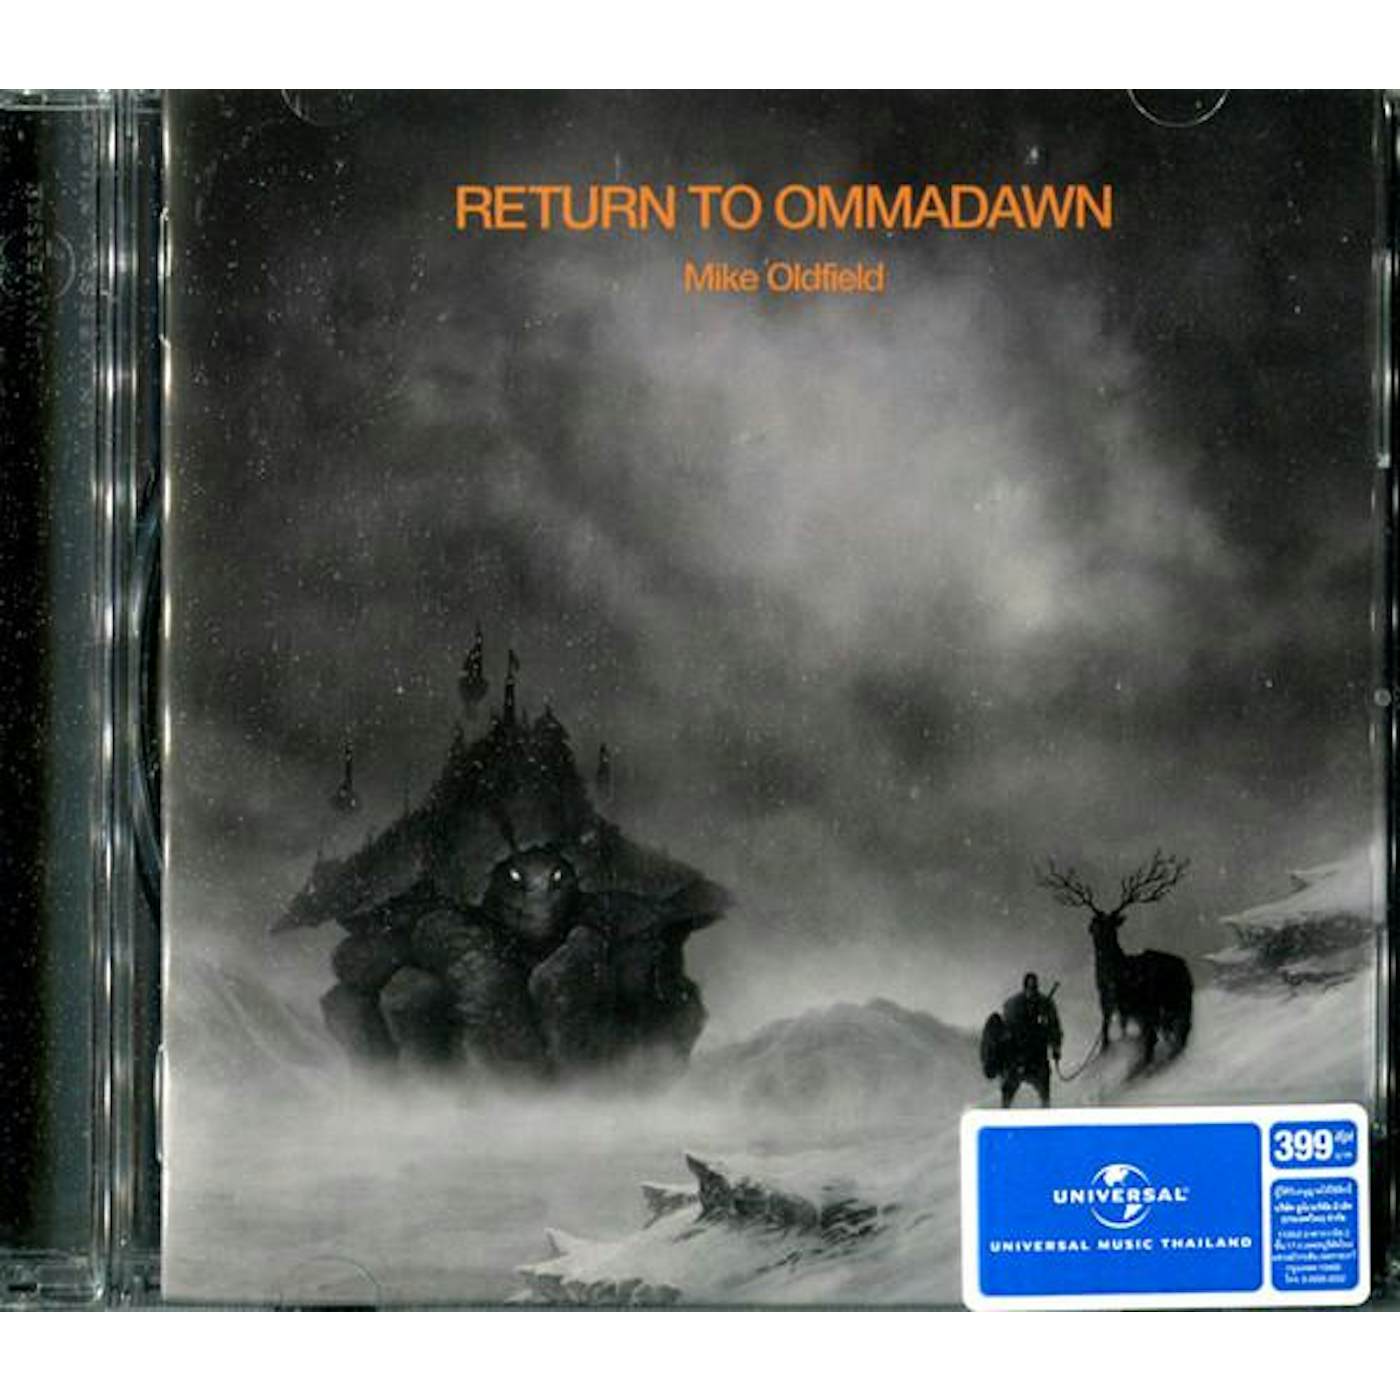 Mike Oldfield RETURN TO OMMADAWN CD